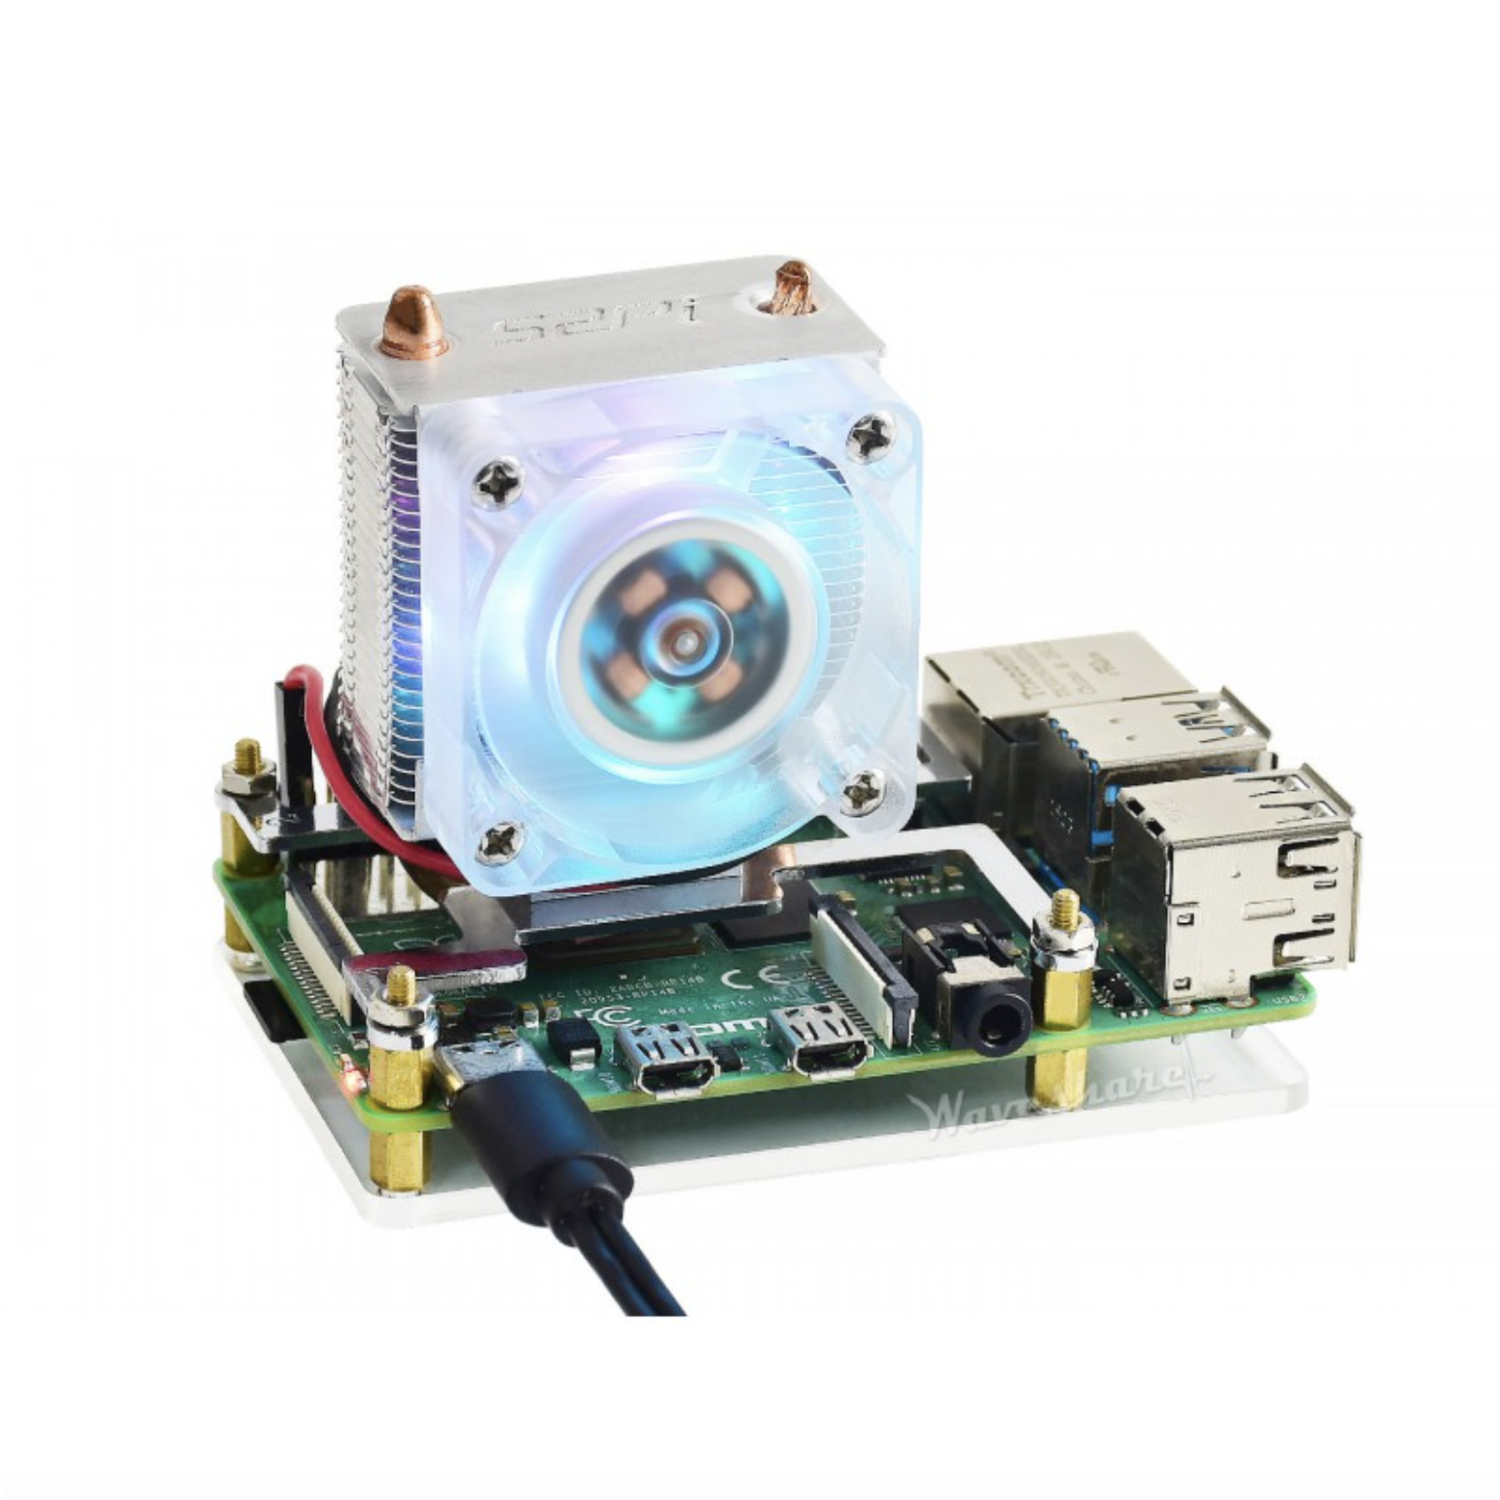 ICE Tower CPU Cooling Fan for Raspberry Pi 4 & 3, Super Heat Dissipation